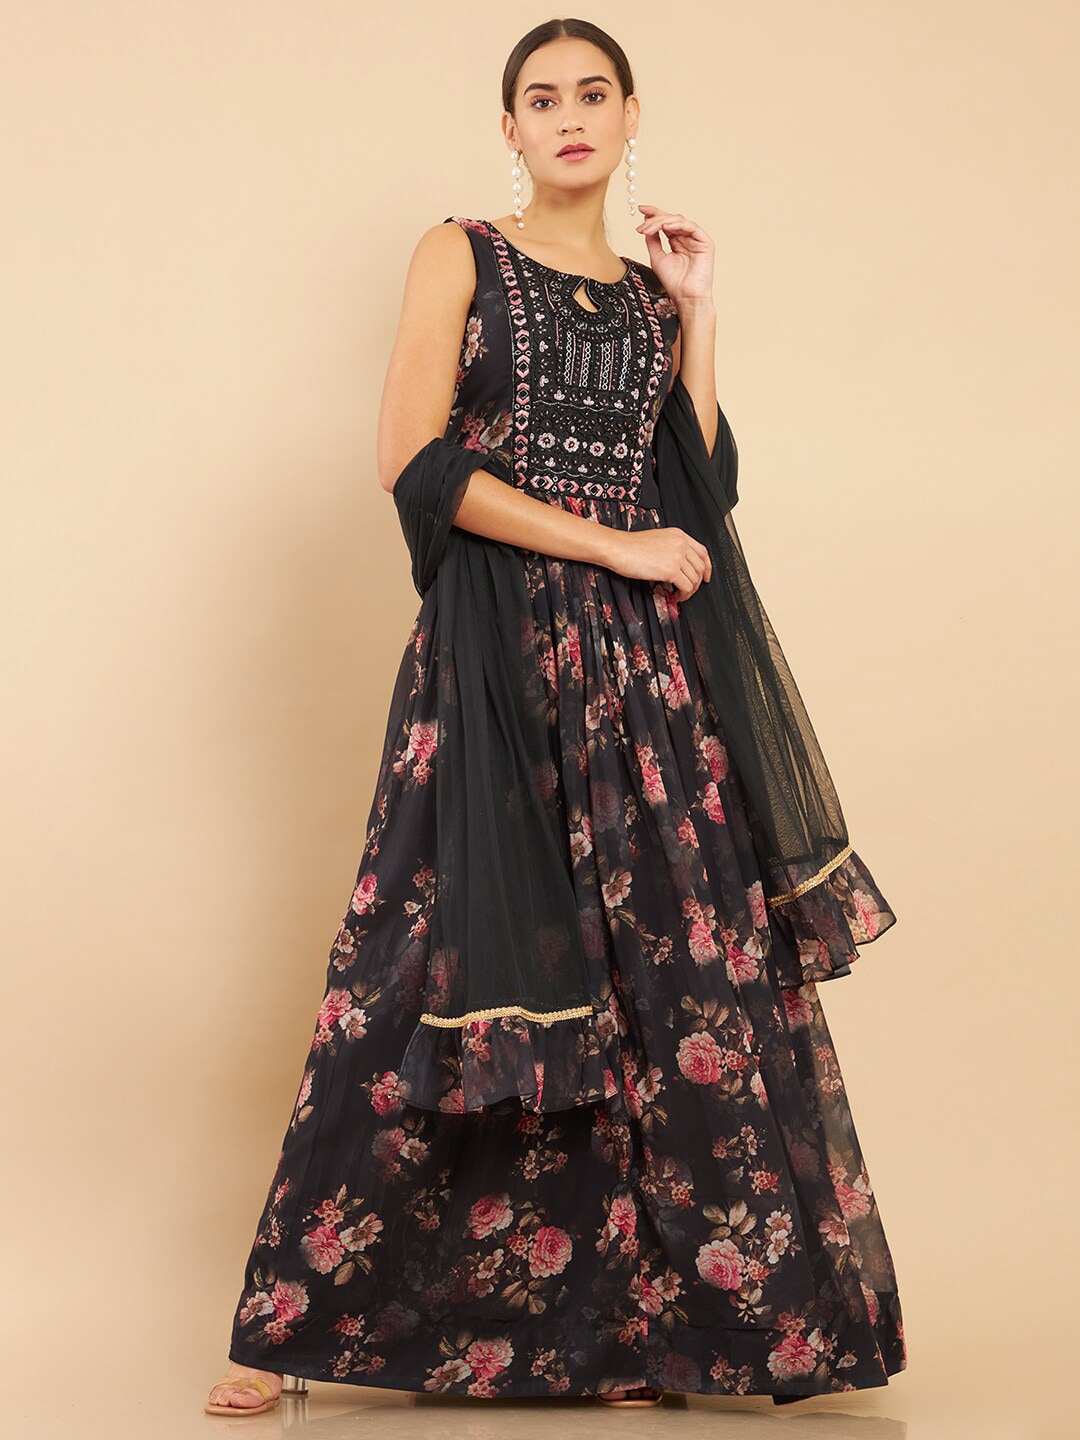 Soch Black Floral Keyhole Neck Georgette Ethnic Maxi Maxi Dress Price in India